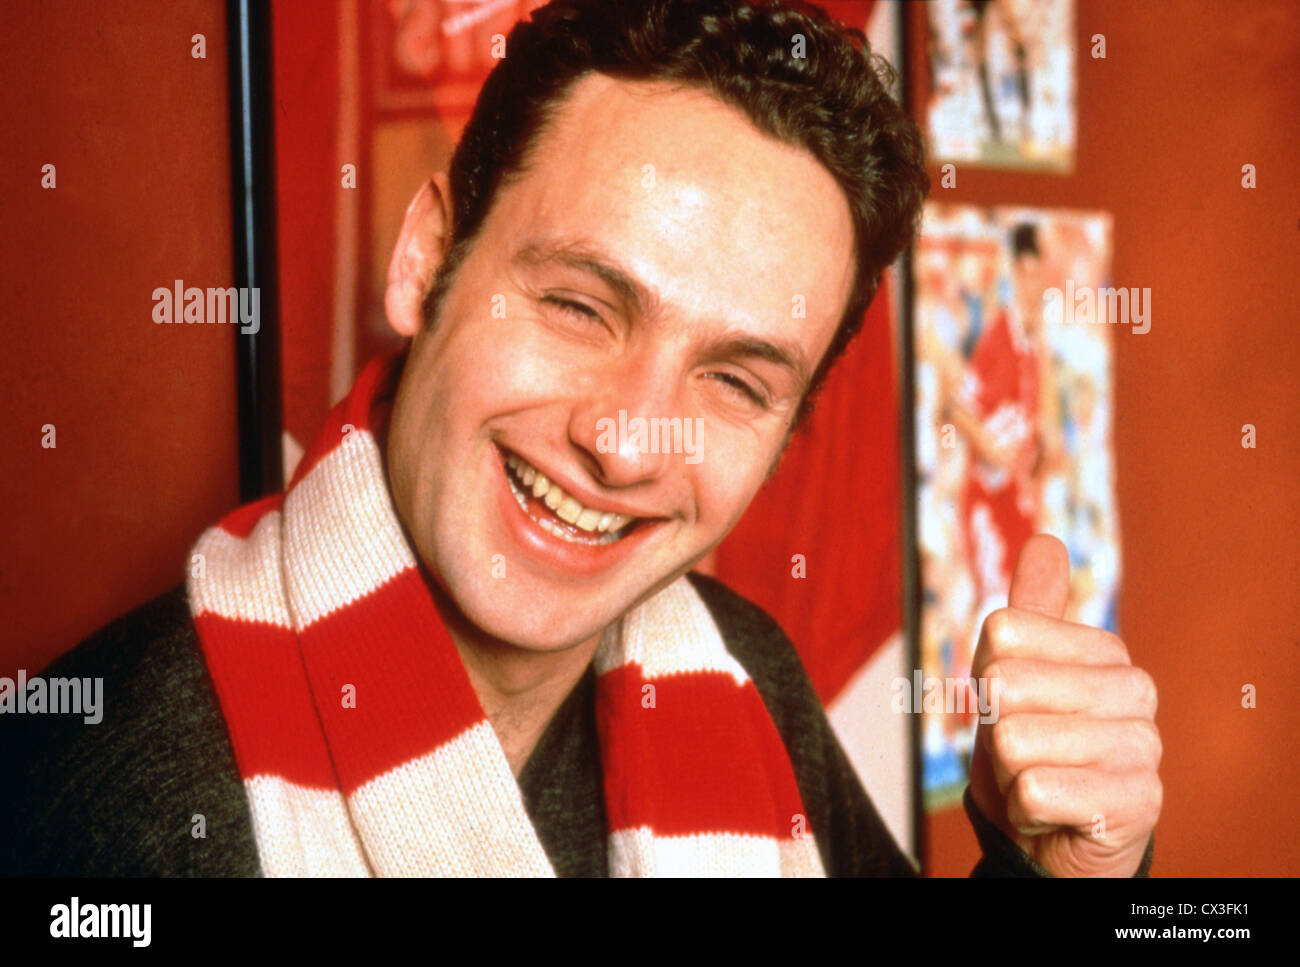 Cette vie (1996-1997) PLAT ANDREW LINCOLN THLF 011 COLLECTION MOVIESTORE LTD Banque D'Images